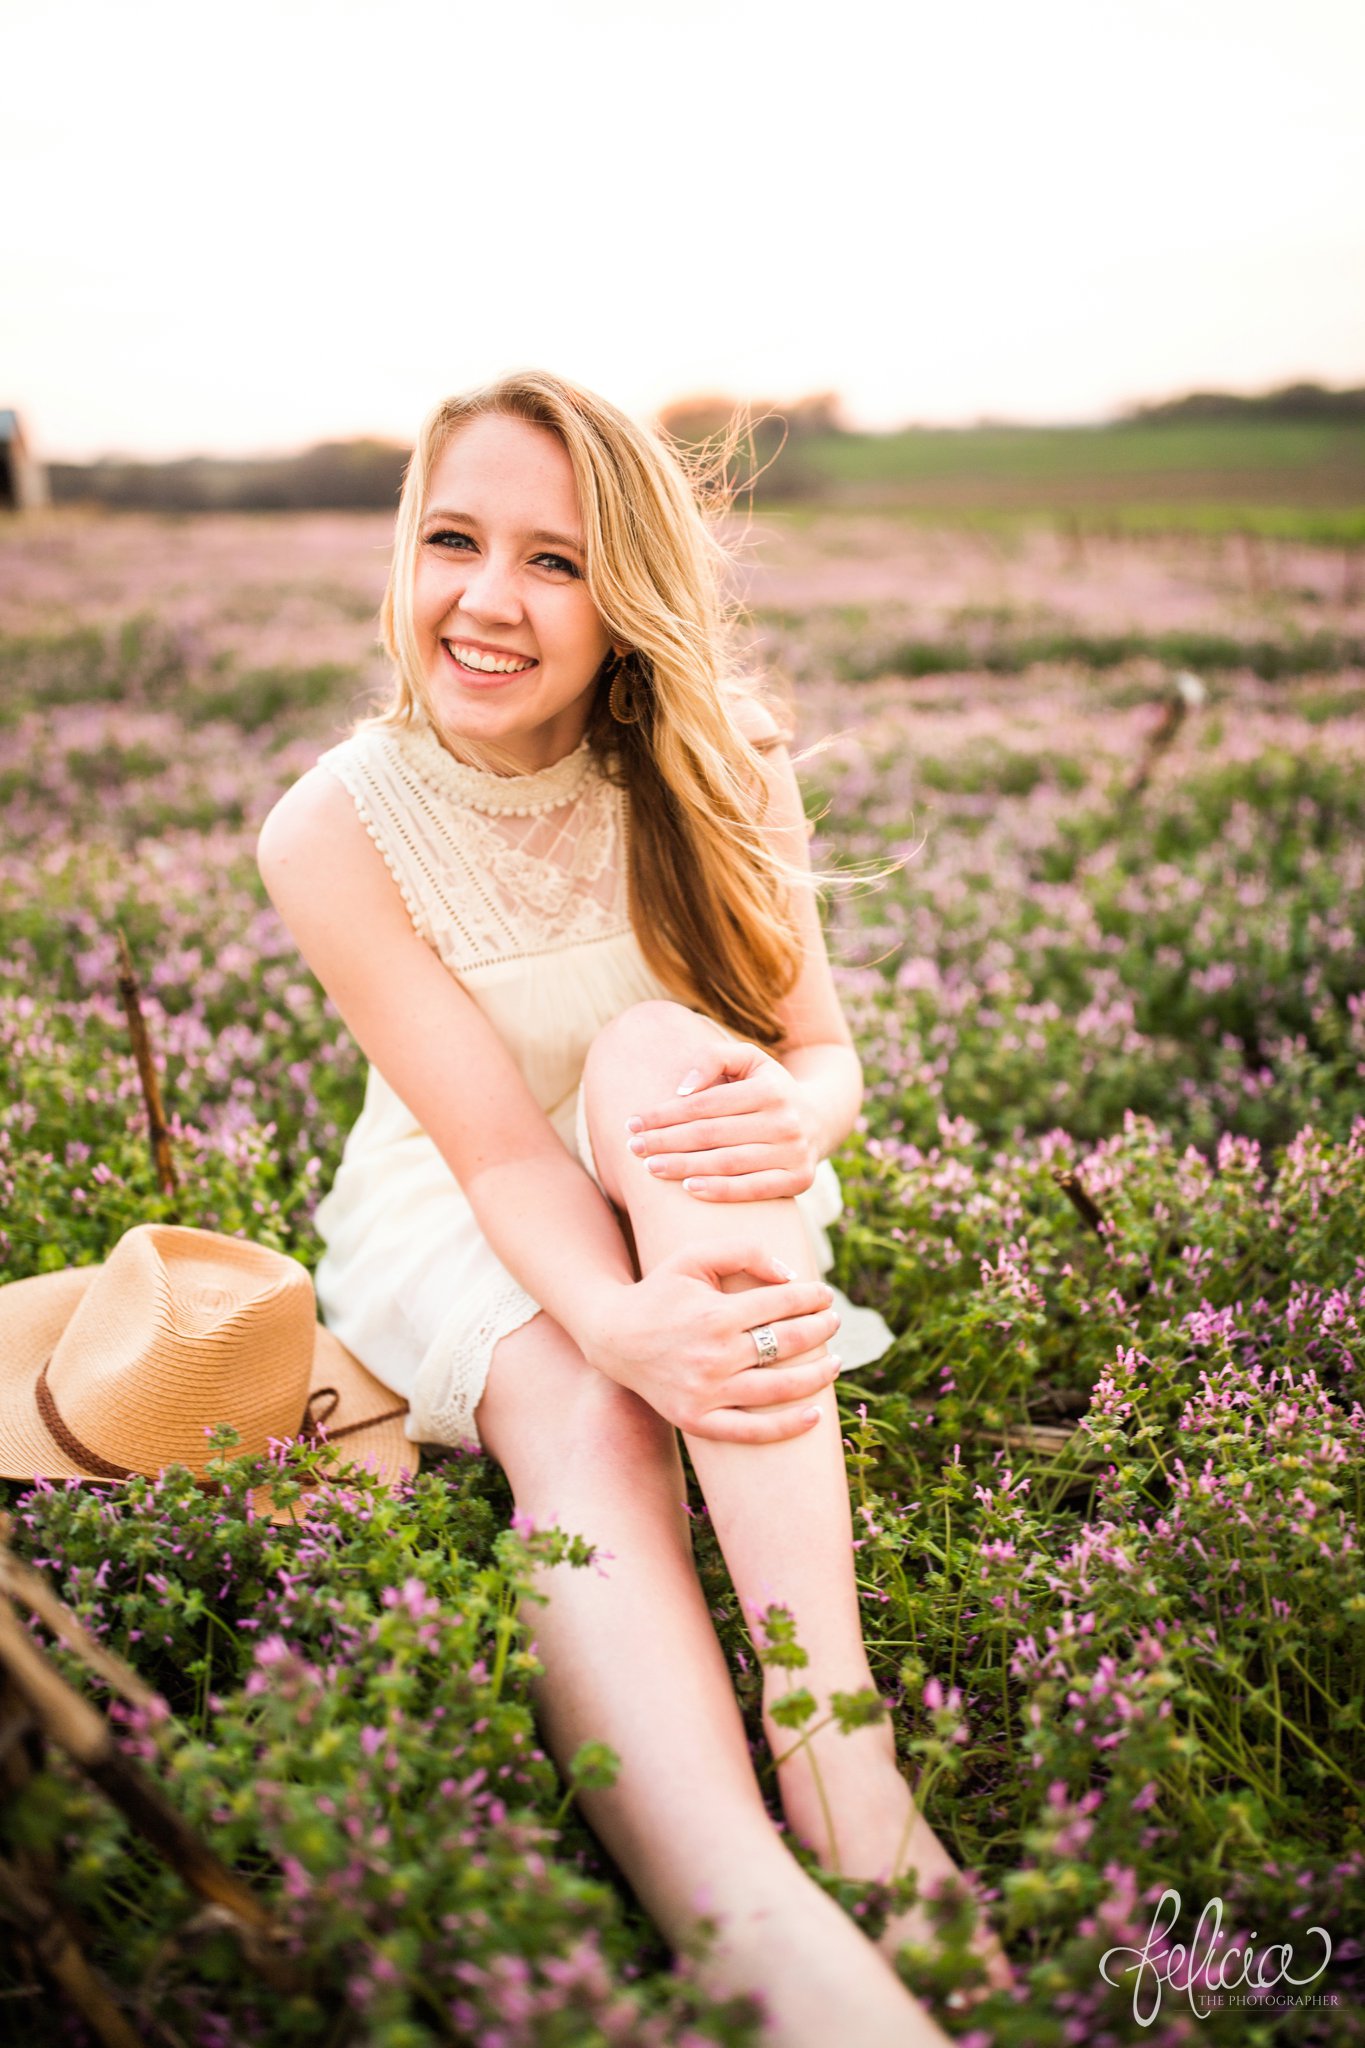 senior pictures | images by feliciathephotographer.com | Kansas City | rustic | long blonde hair | nature background | white dress | elegant | dramatic | candid | dramatic pose | flower field | sitting in flowers | cross legged | purple flowers | blowing kisses 